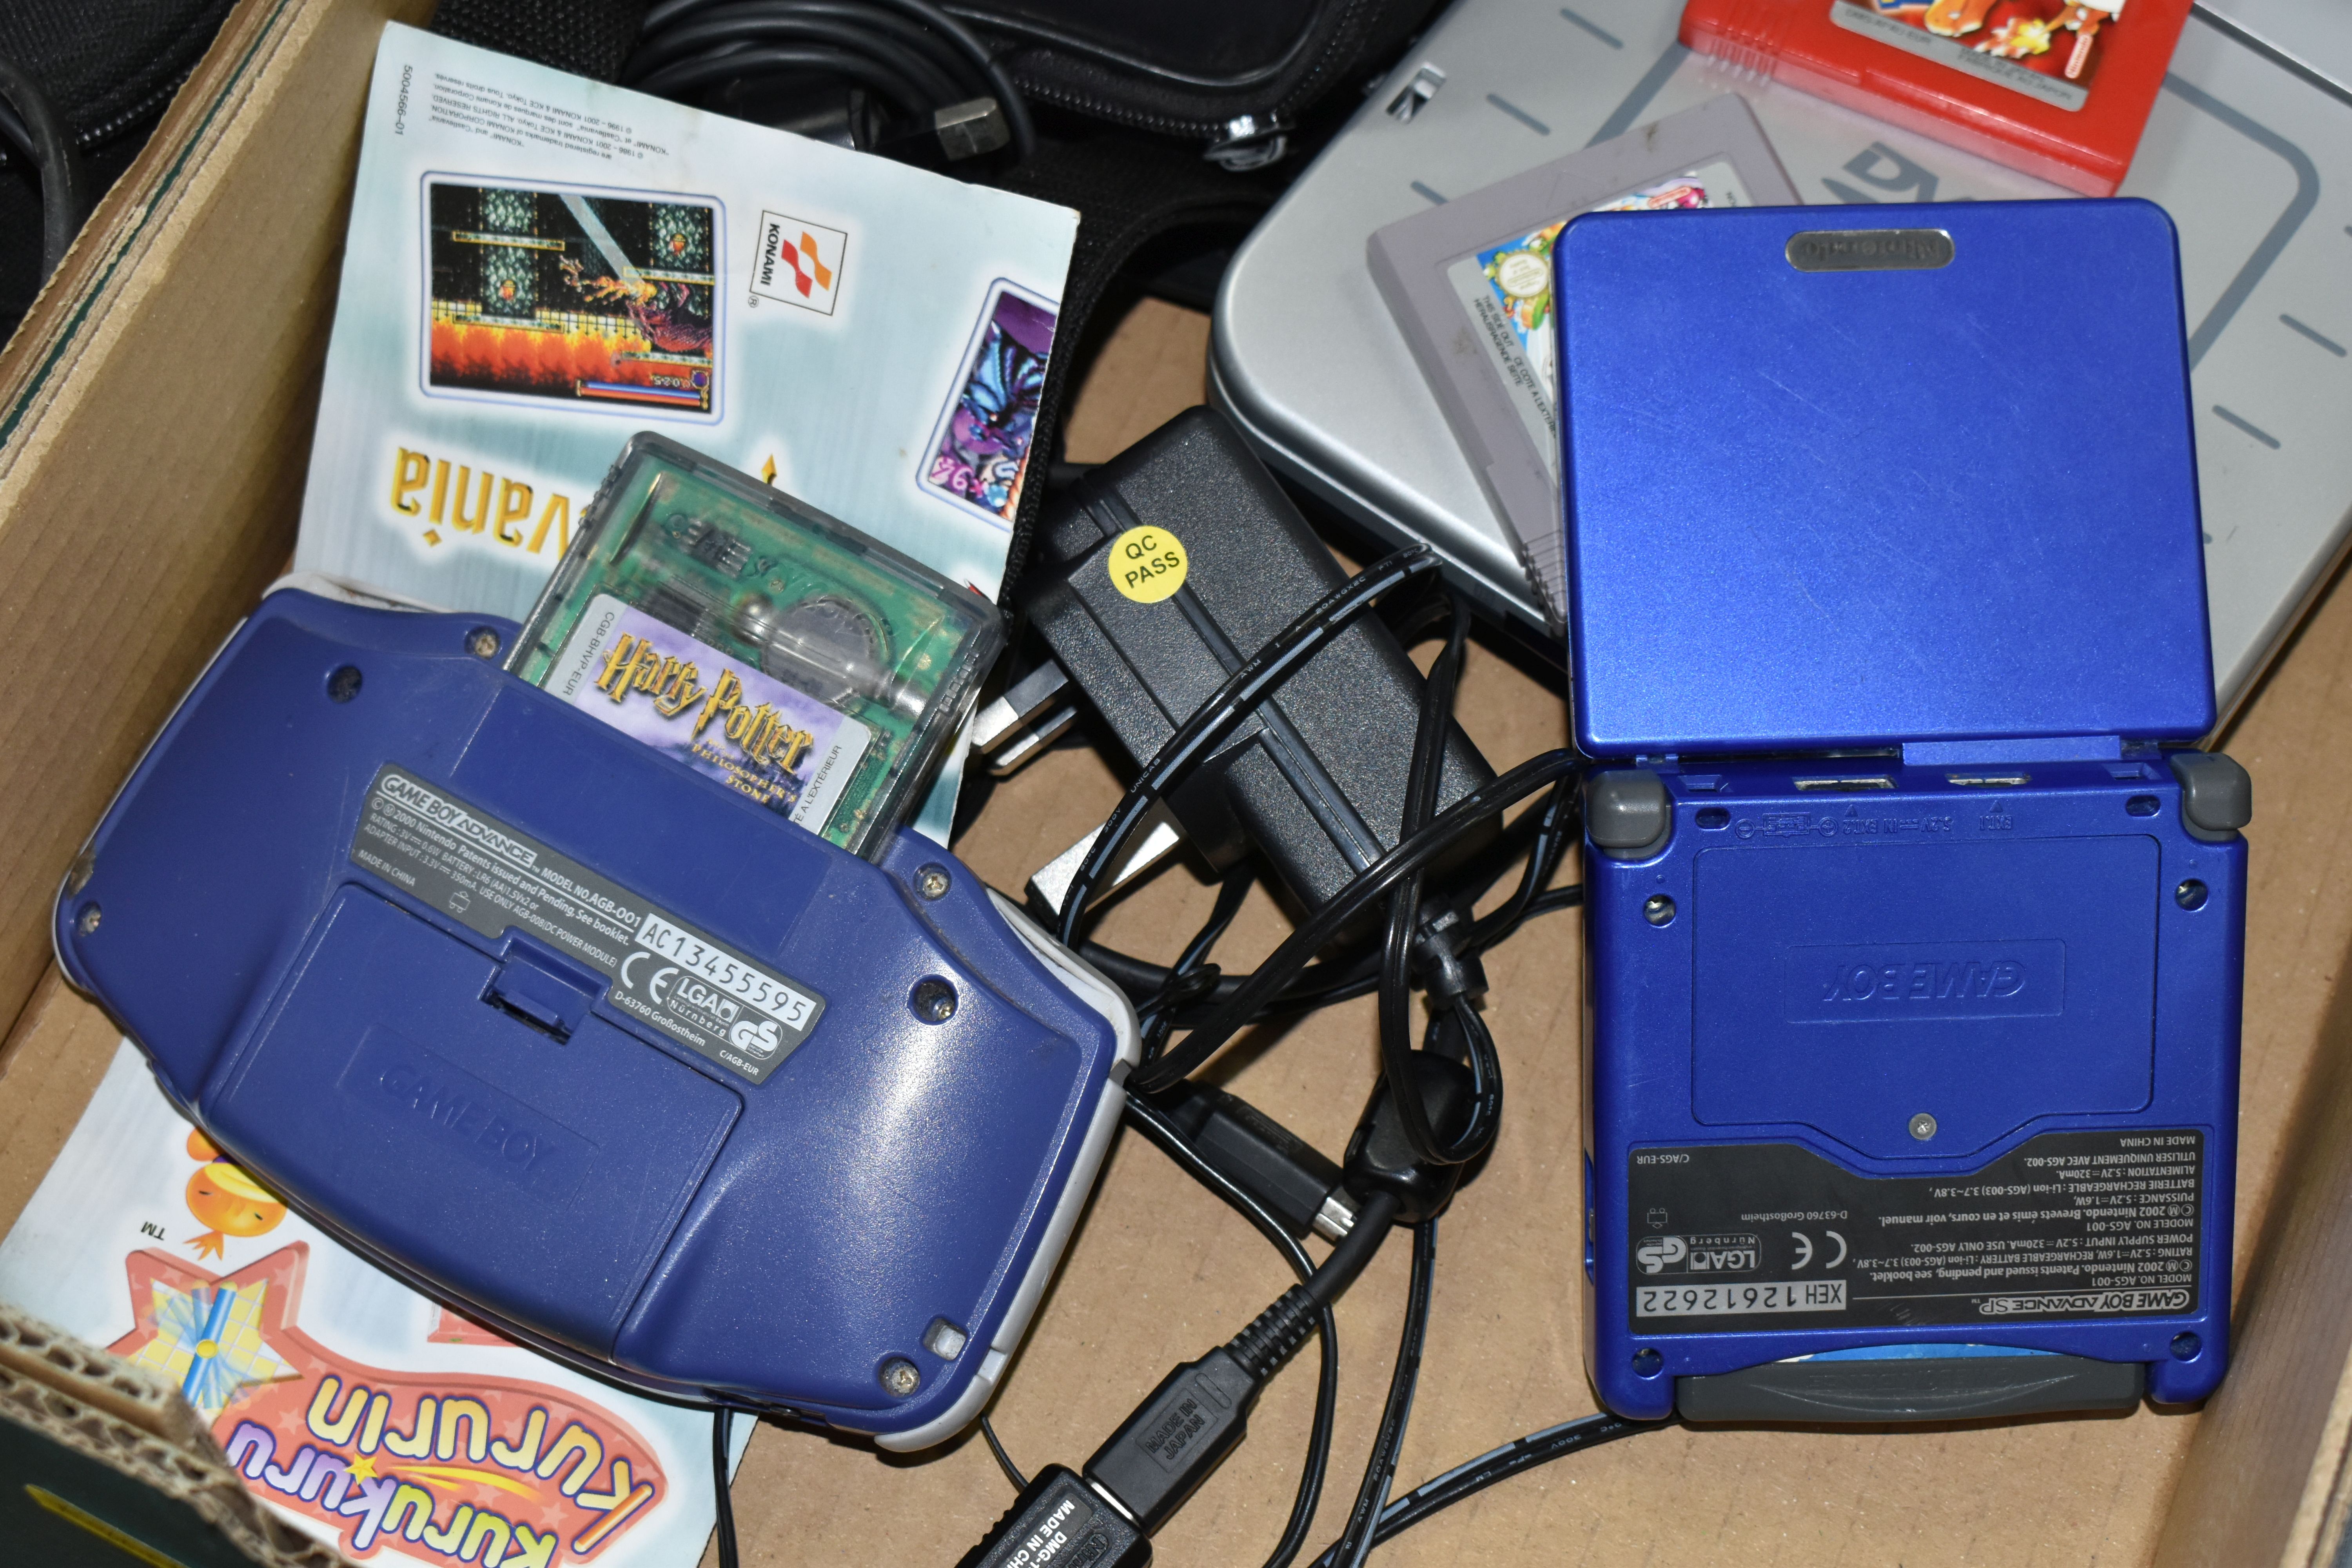 NINTENDO GAMEBOY ADVANCE, NINTENDO GAMEBOY ADVANCE SP AND GAMES, includes Super Mario Advance, - Image 2 of 4